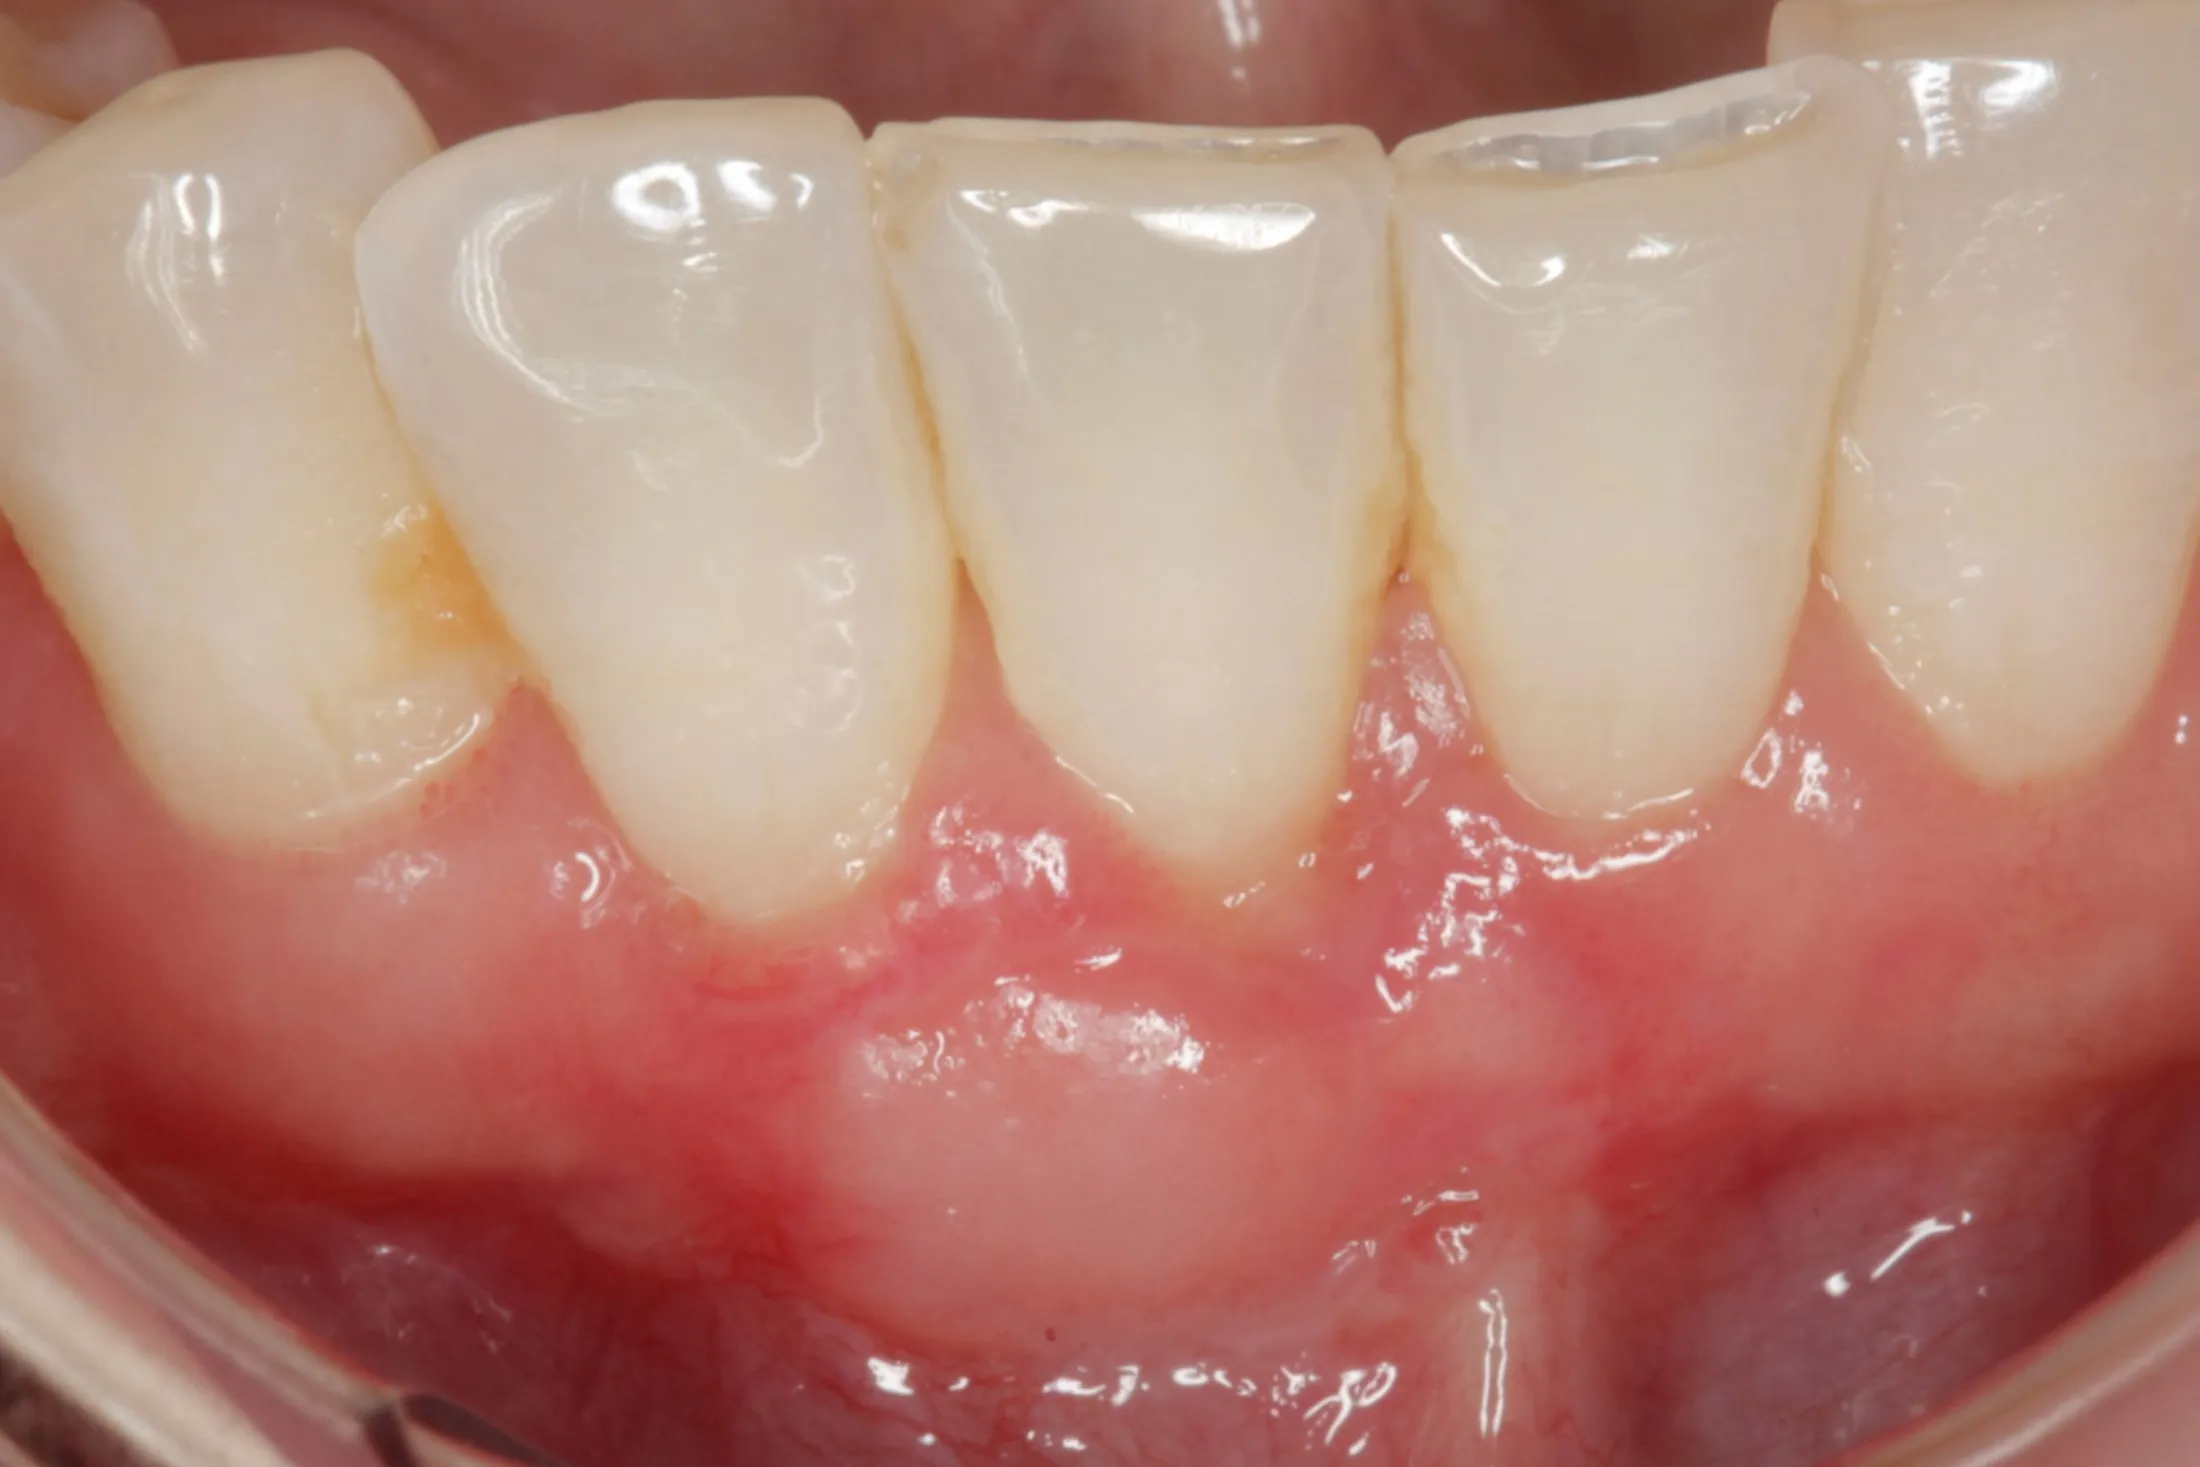 Successful restoration of gums visible after grafting treatment.